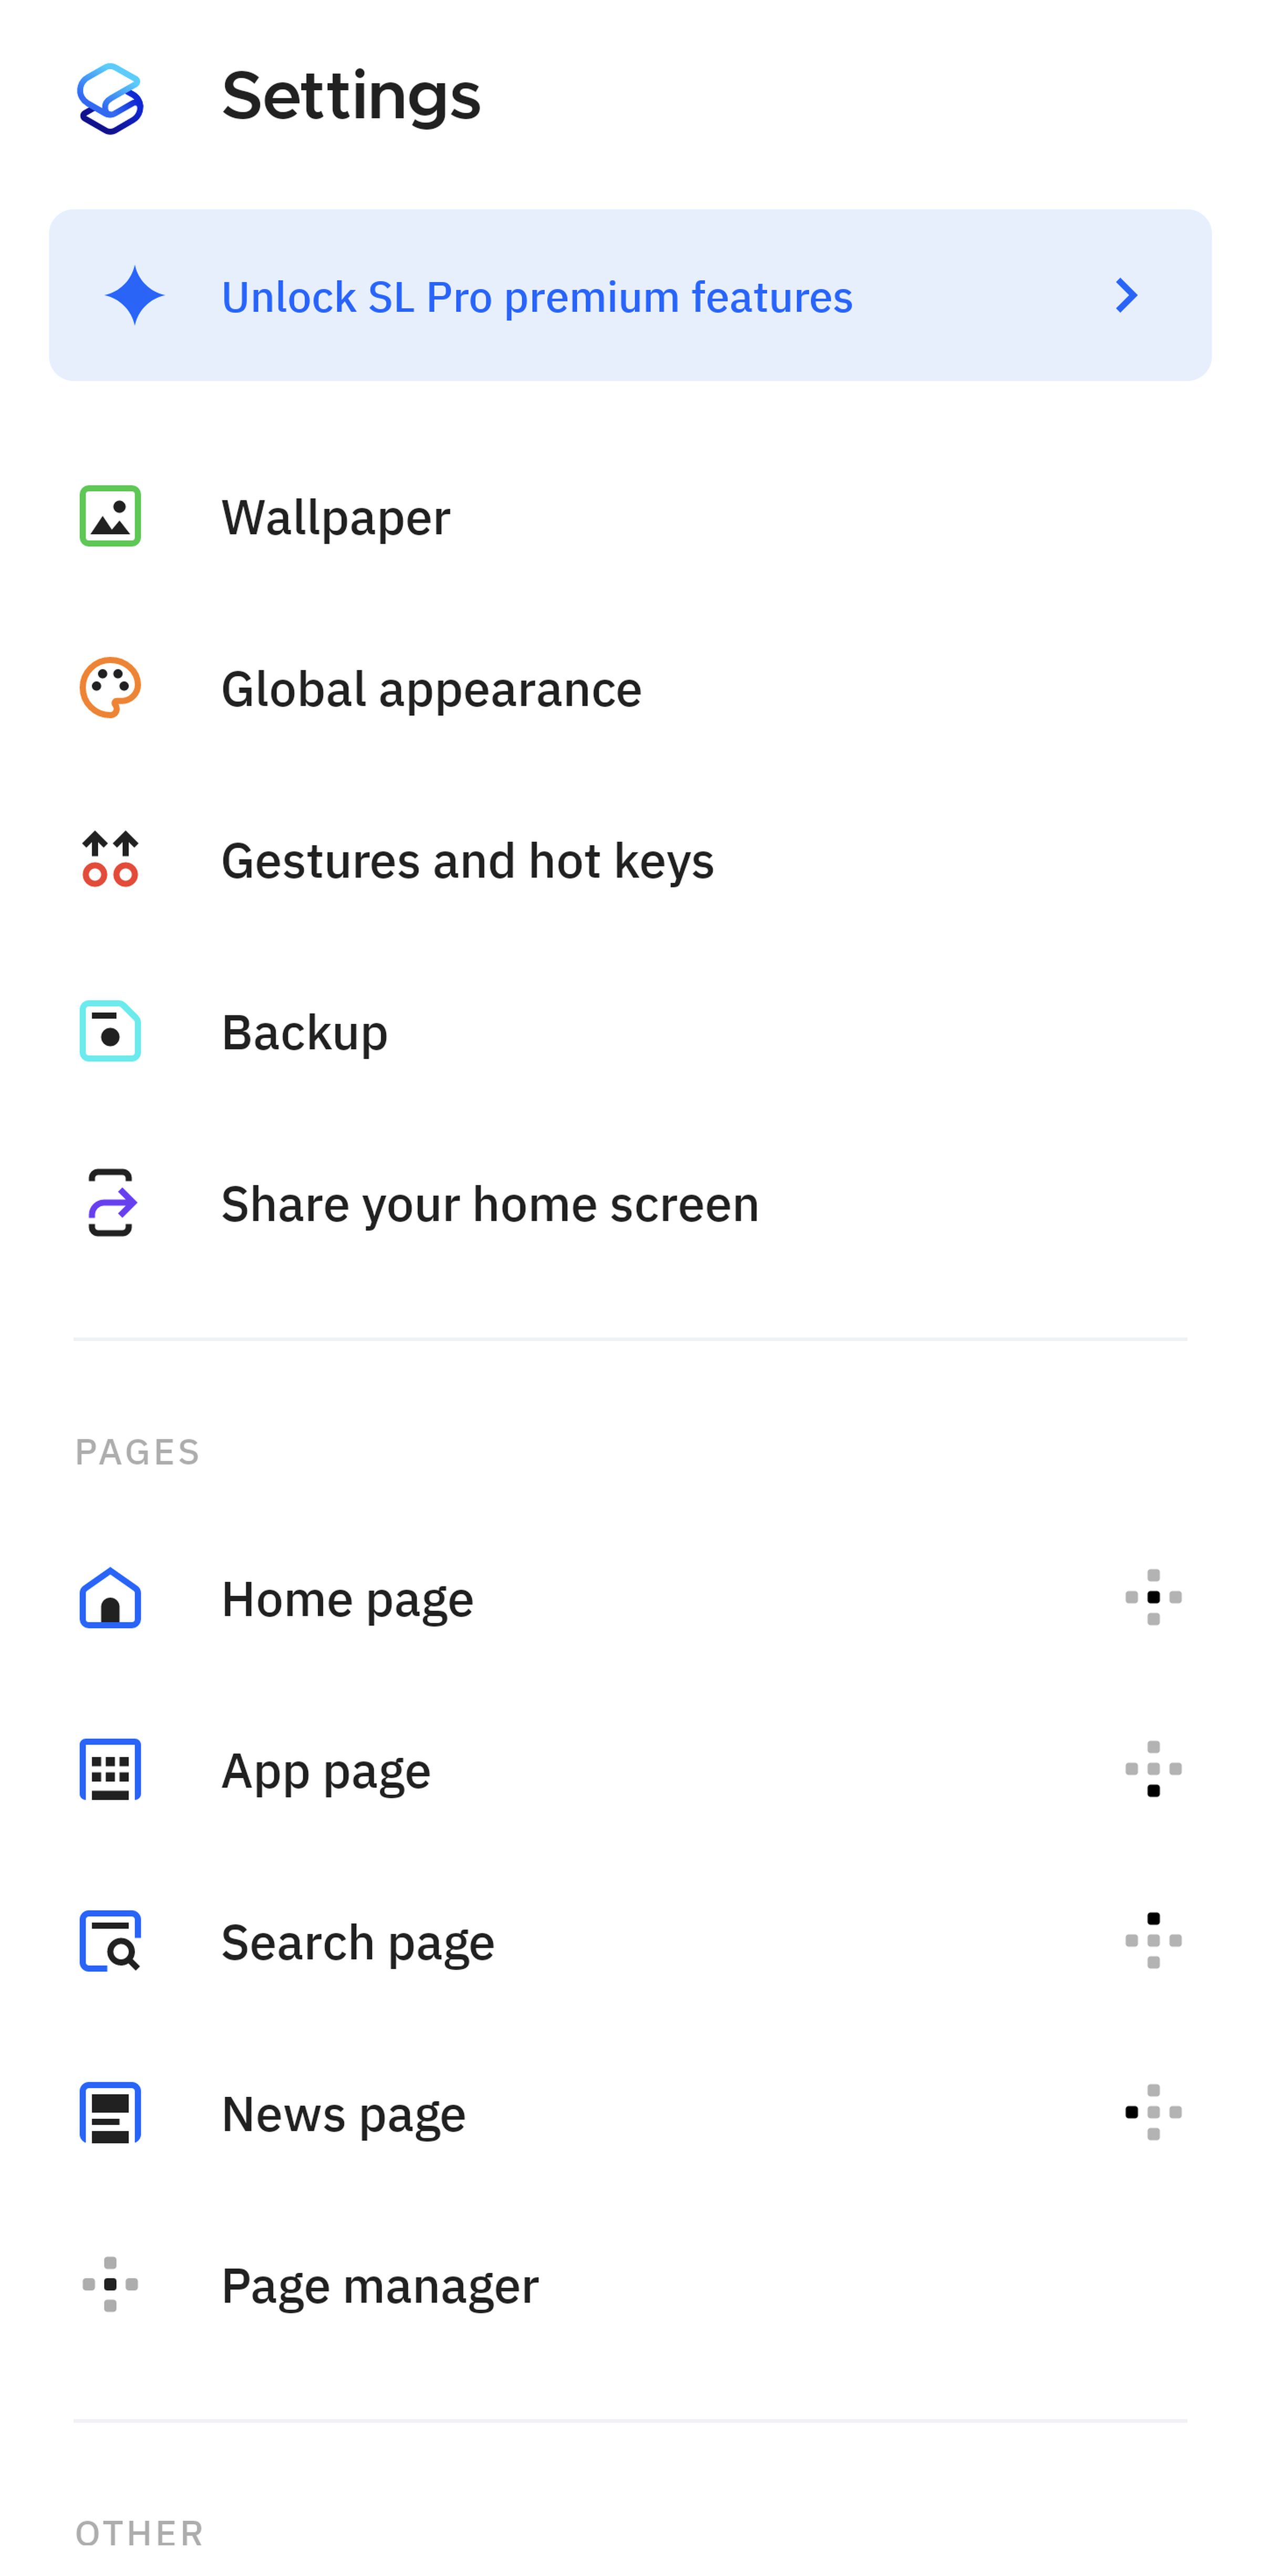 Page with Settings on top, and a list of features such as Wallpaper, Global appearance, Gestures and hot keys, etc.